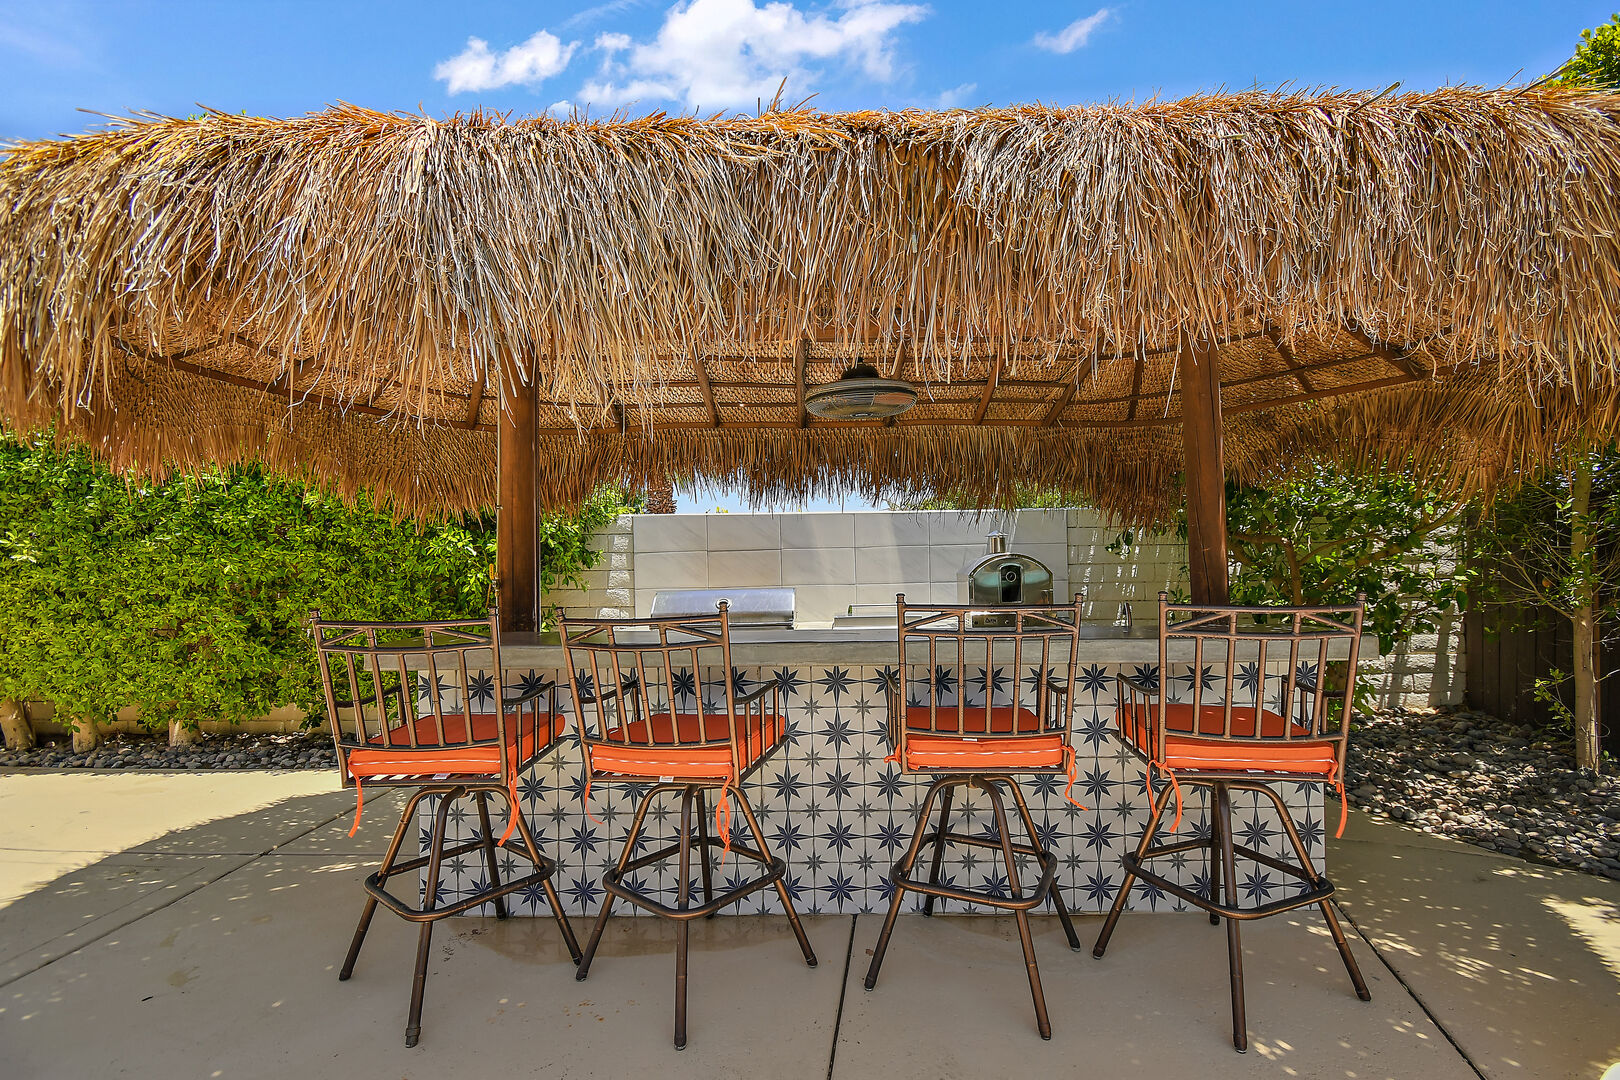 Meals can be prepared on the resort style outdoor barbecue area.